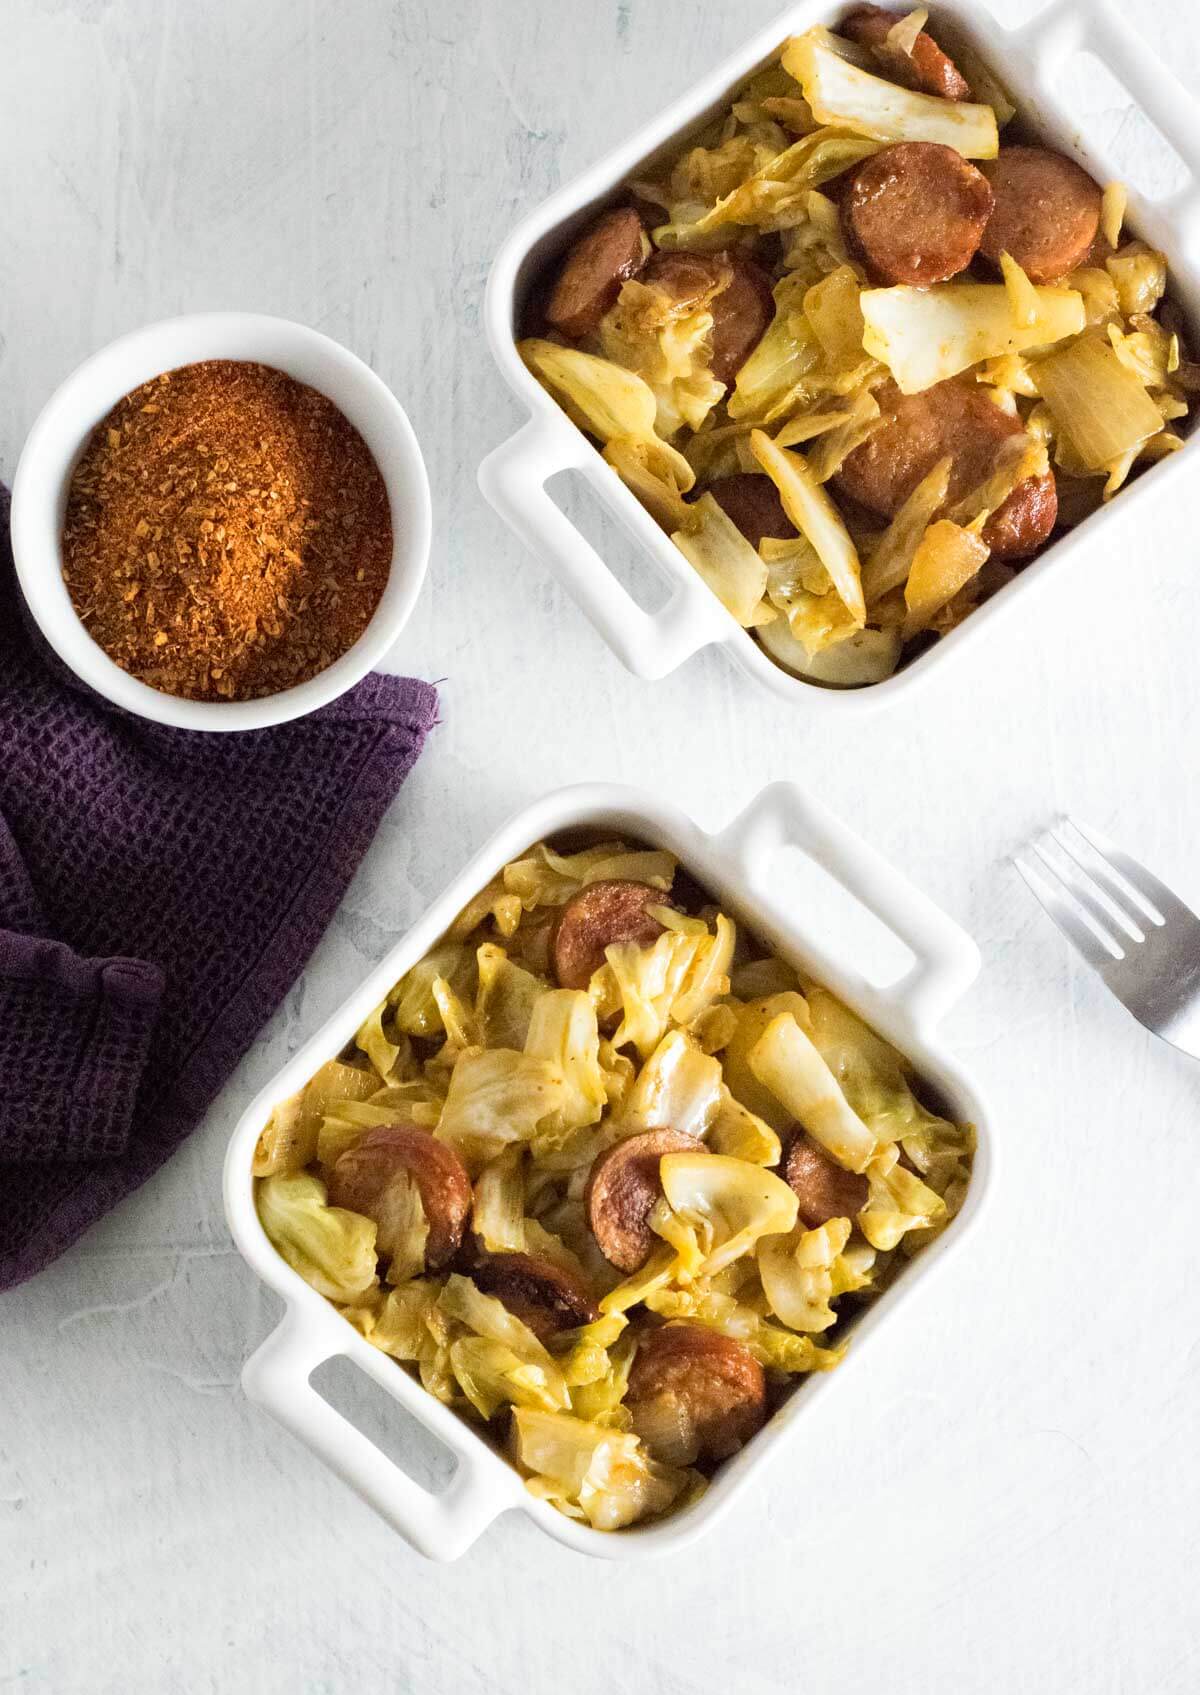 Fried cabbage with sausage.